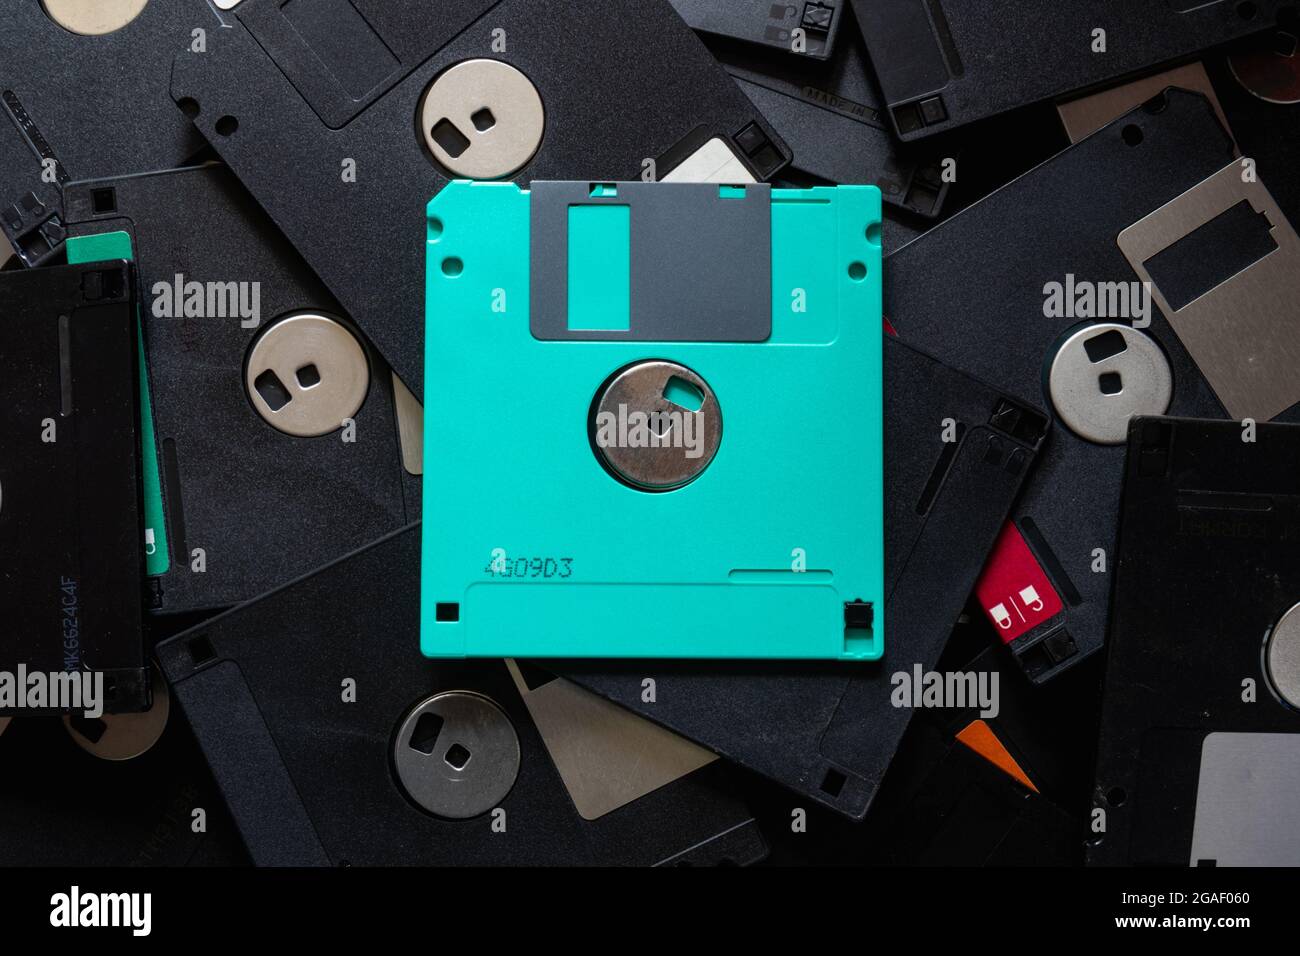 A square floppy disk is a magnetic disk for storing data in an old computer with a small capacity, but floppy disks were still popular in those days b Stock Photo